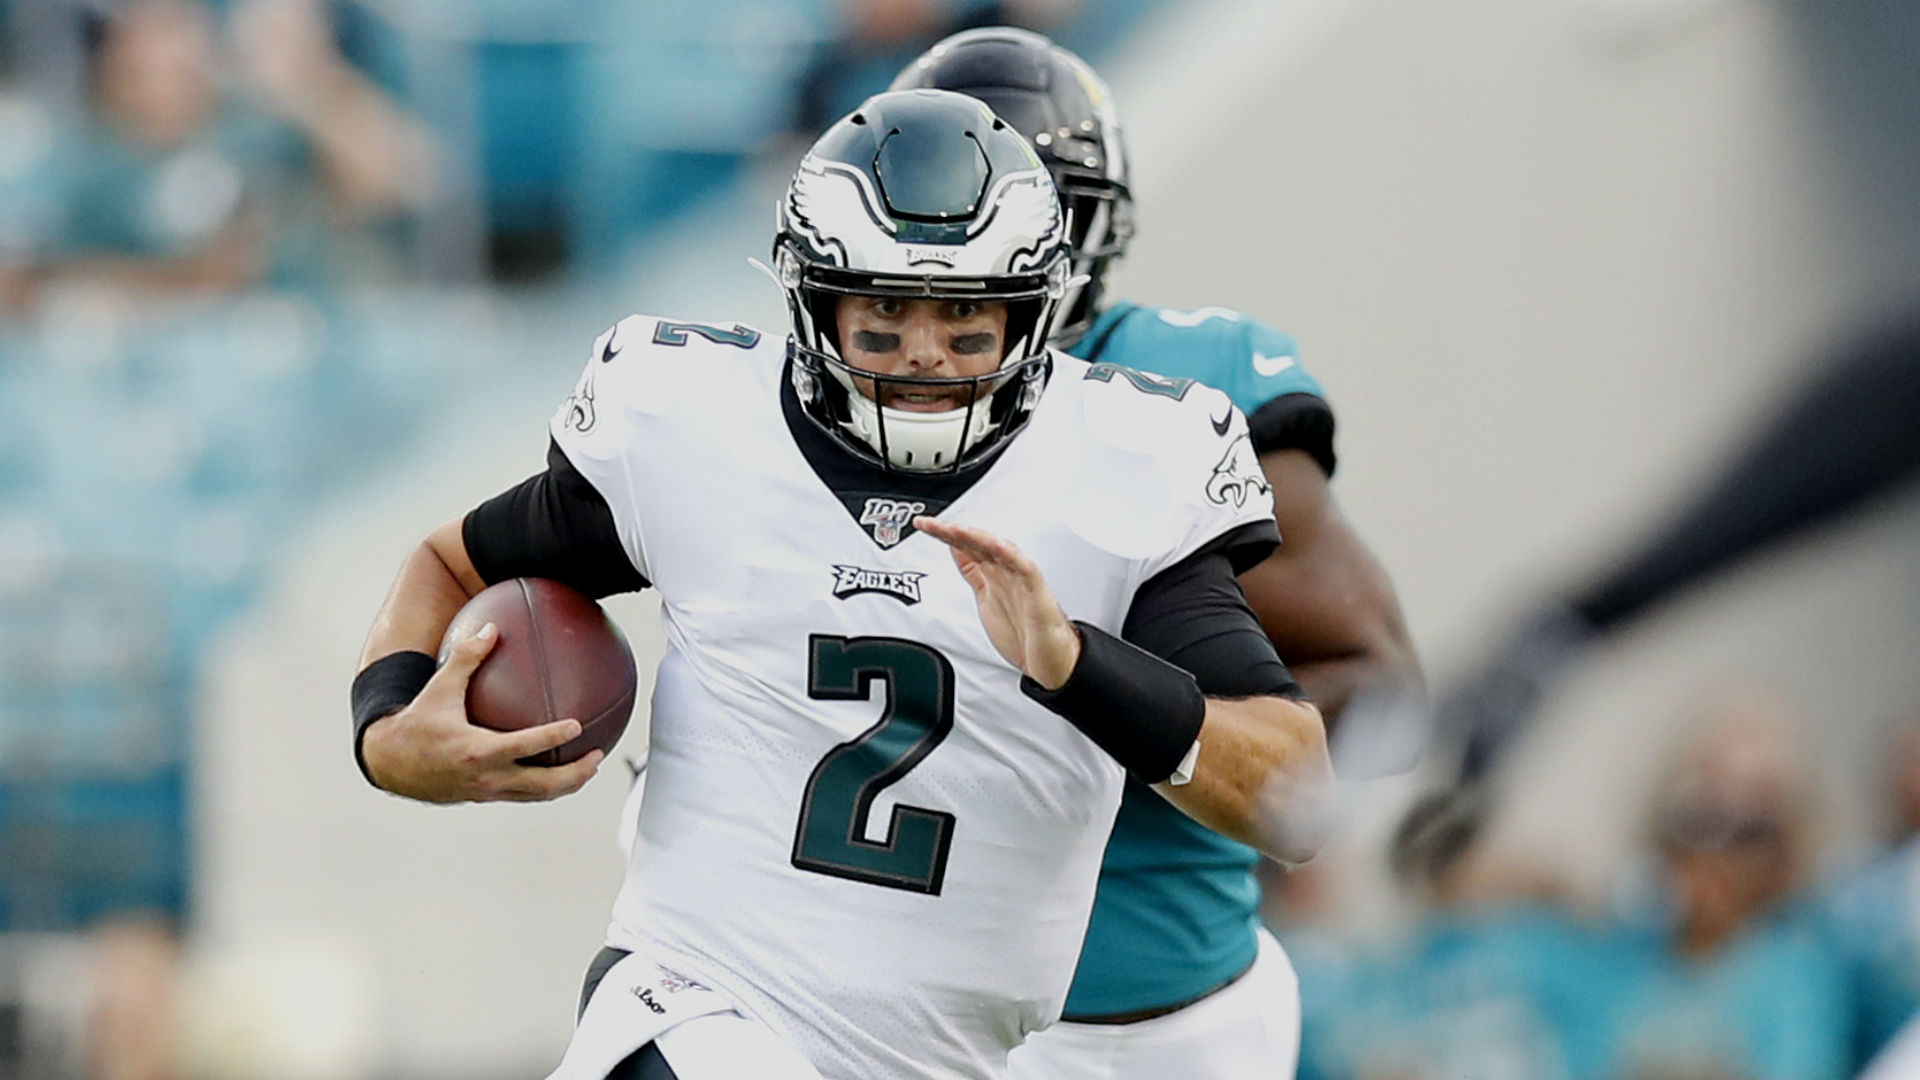 Eagles' Cody Kessler being evaluated for head injury, report says